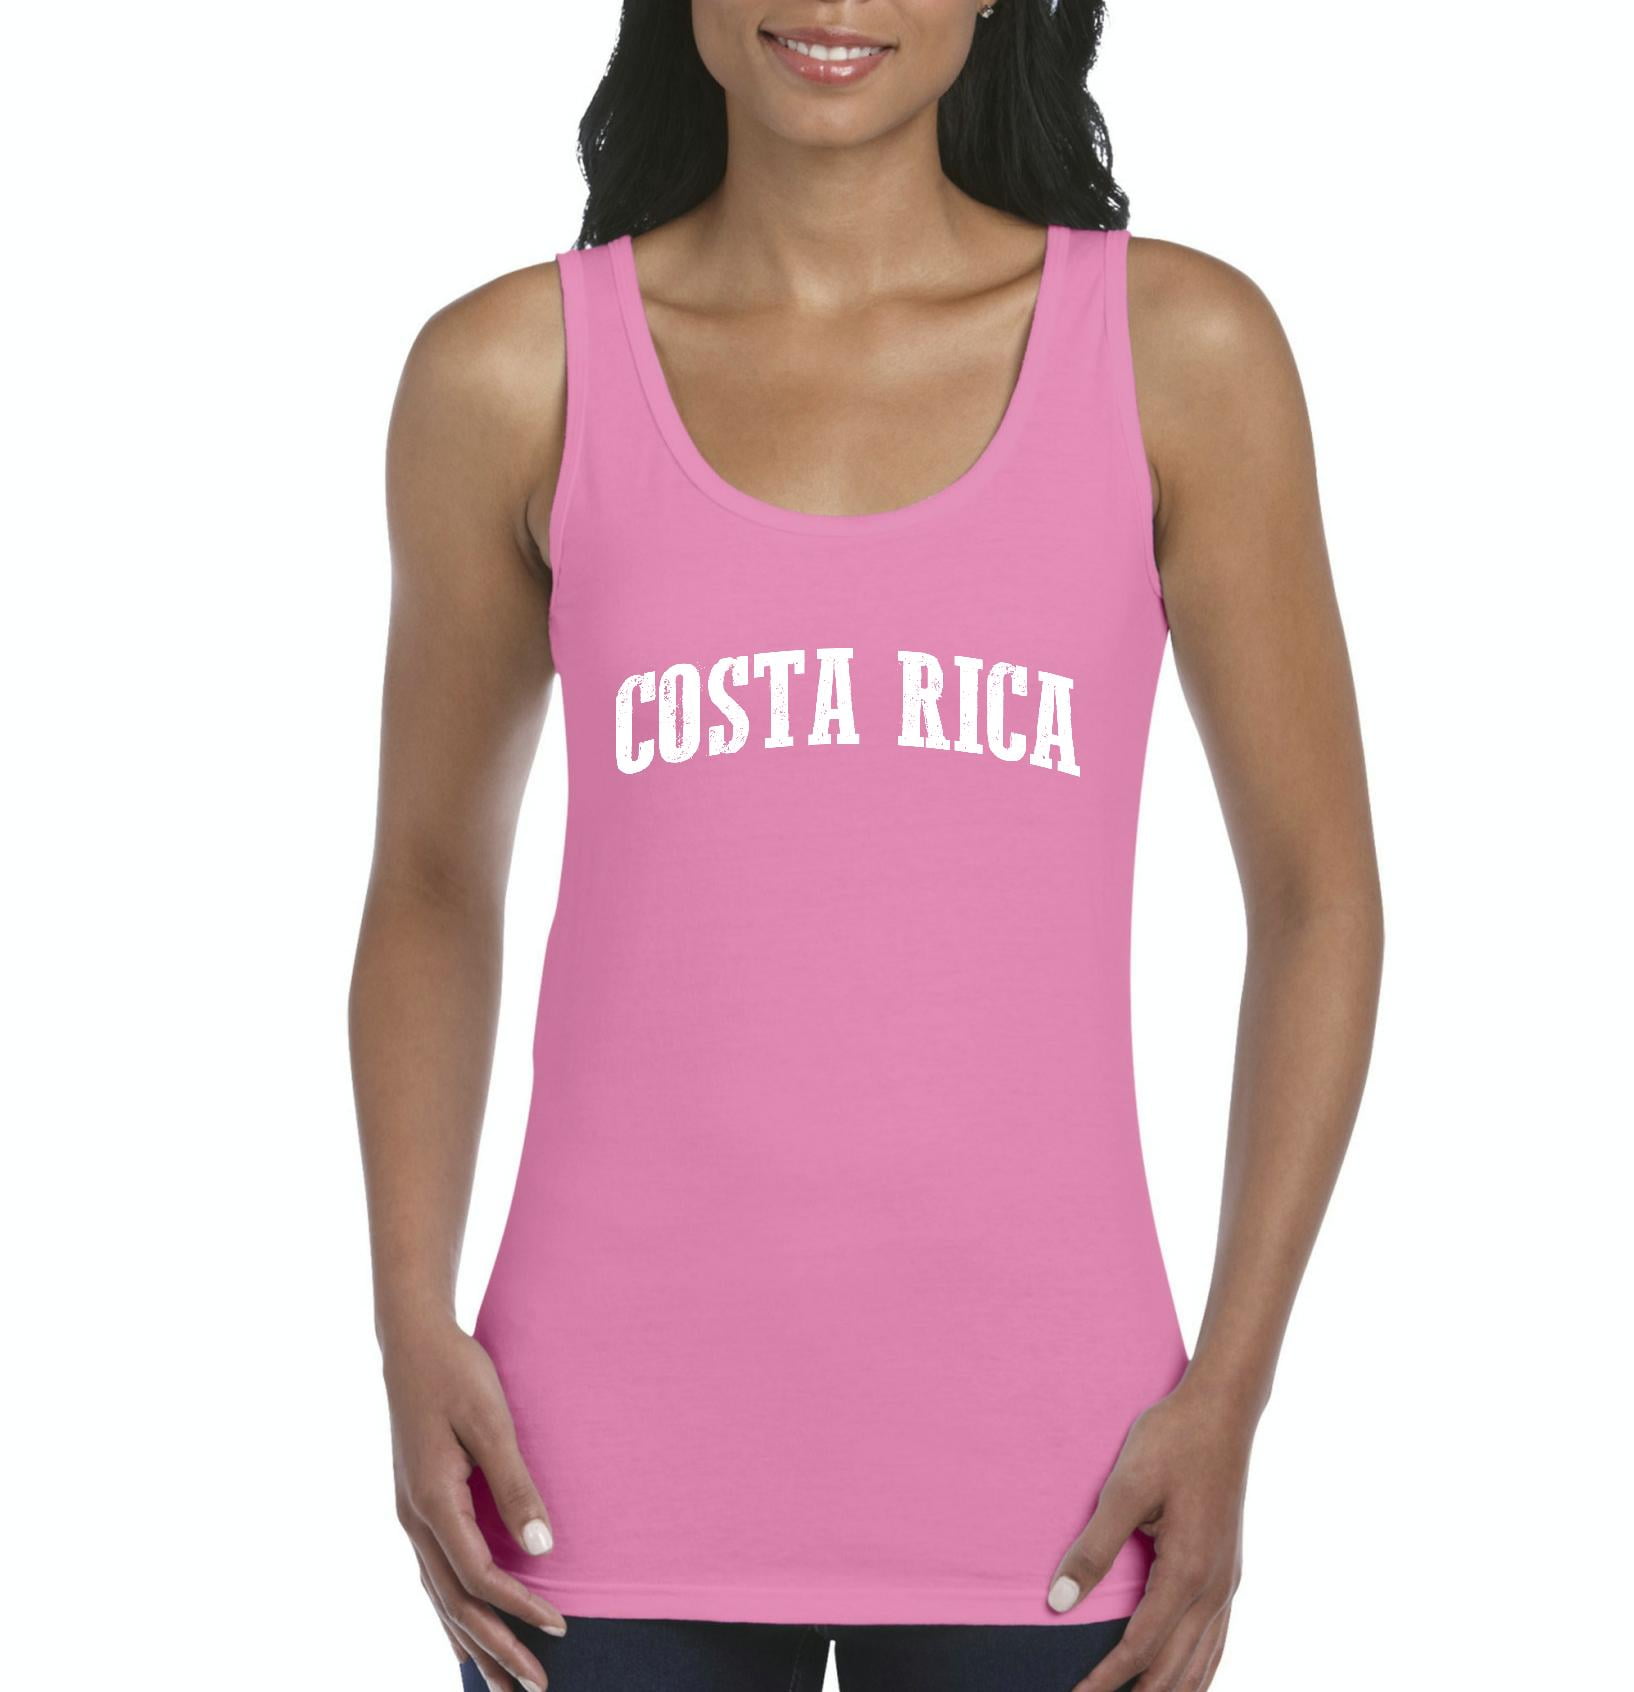 Mens Tank Top Fit Retro Style Costa Rica Silhouette Cotton T-Shirt 